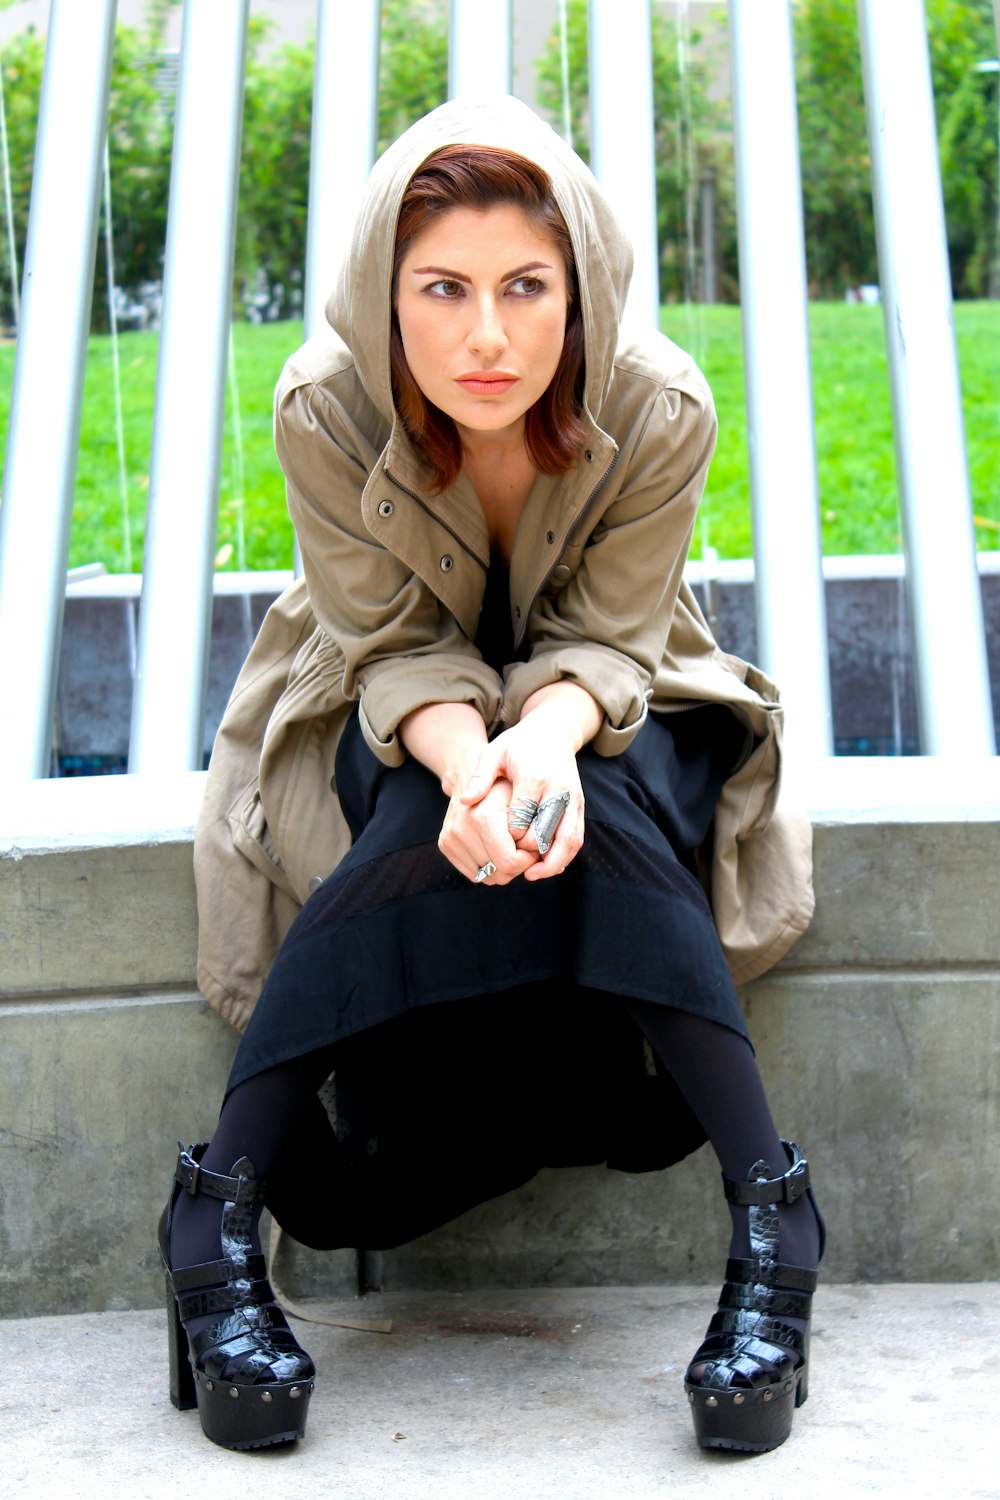 woman in brown coat and black skirt sitting on concrete bench